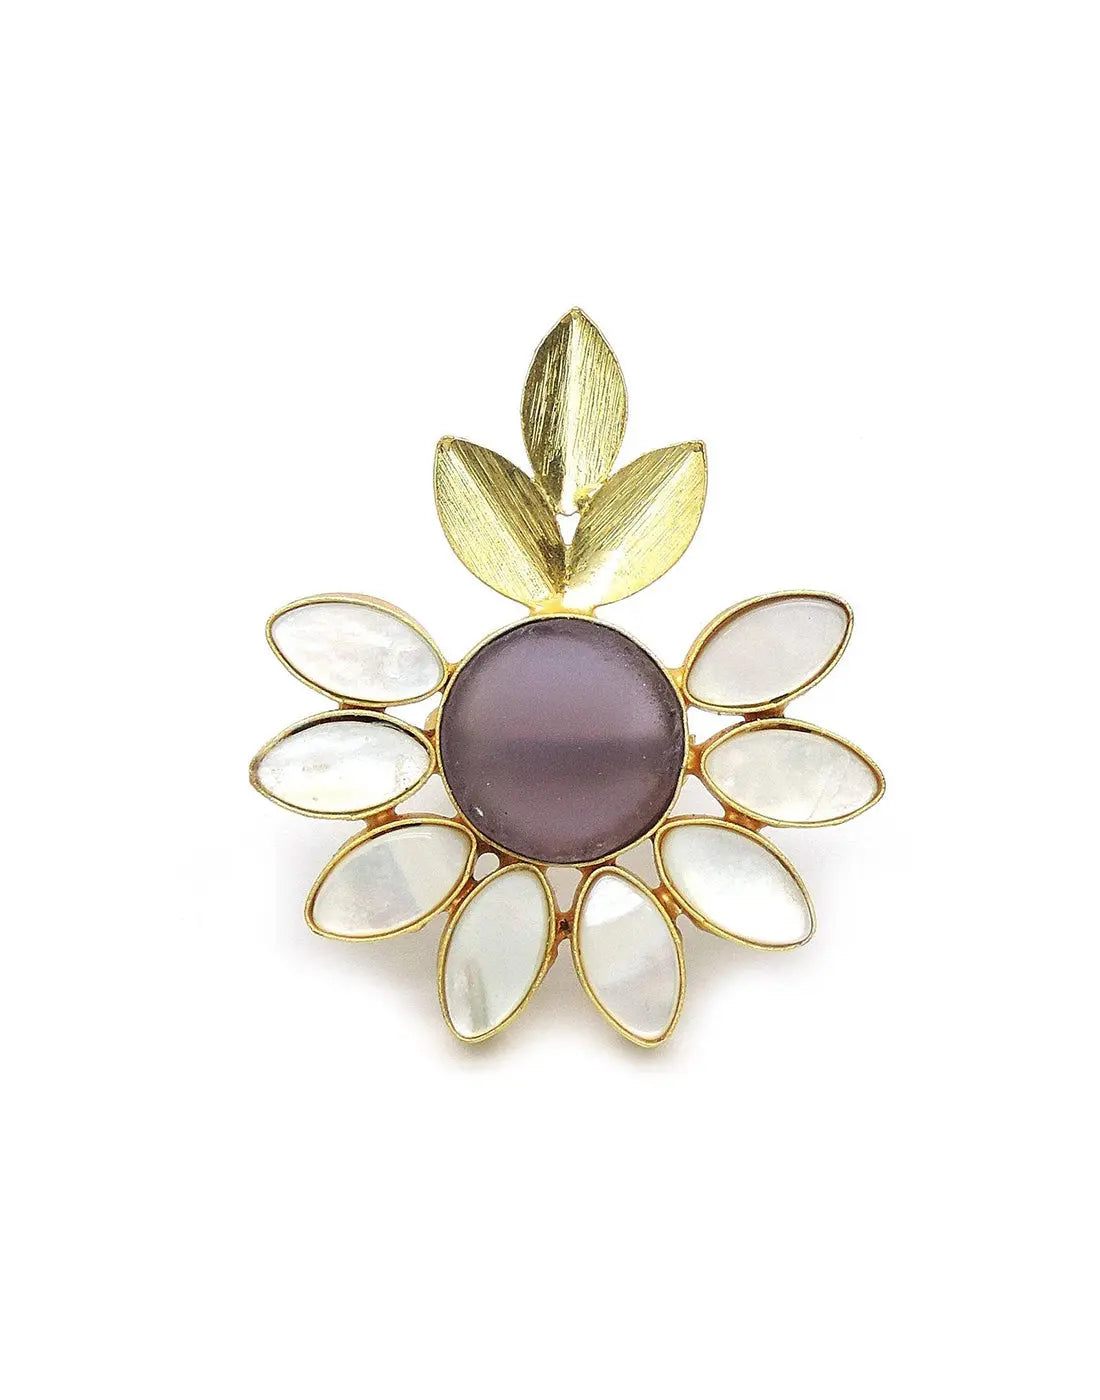 Sabrina Ring- Handcrafted Jewellery from Dori